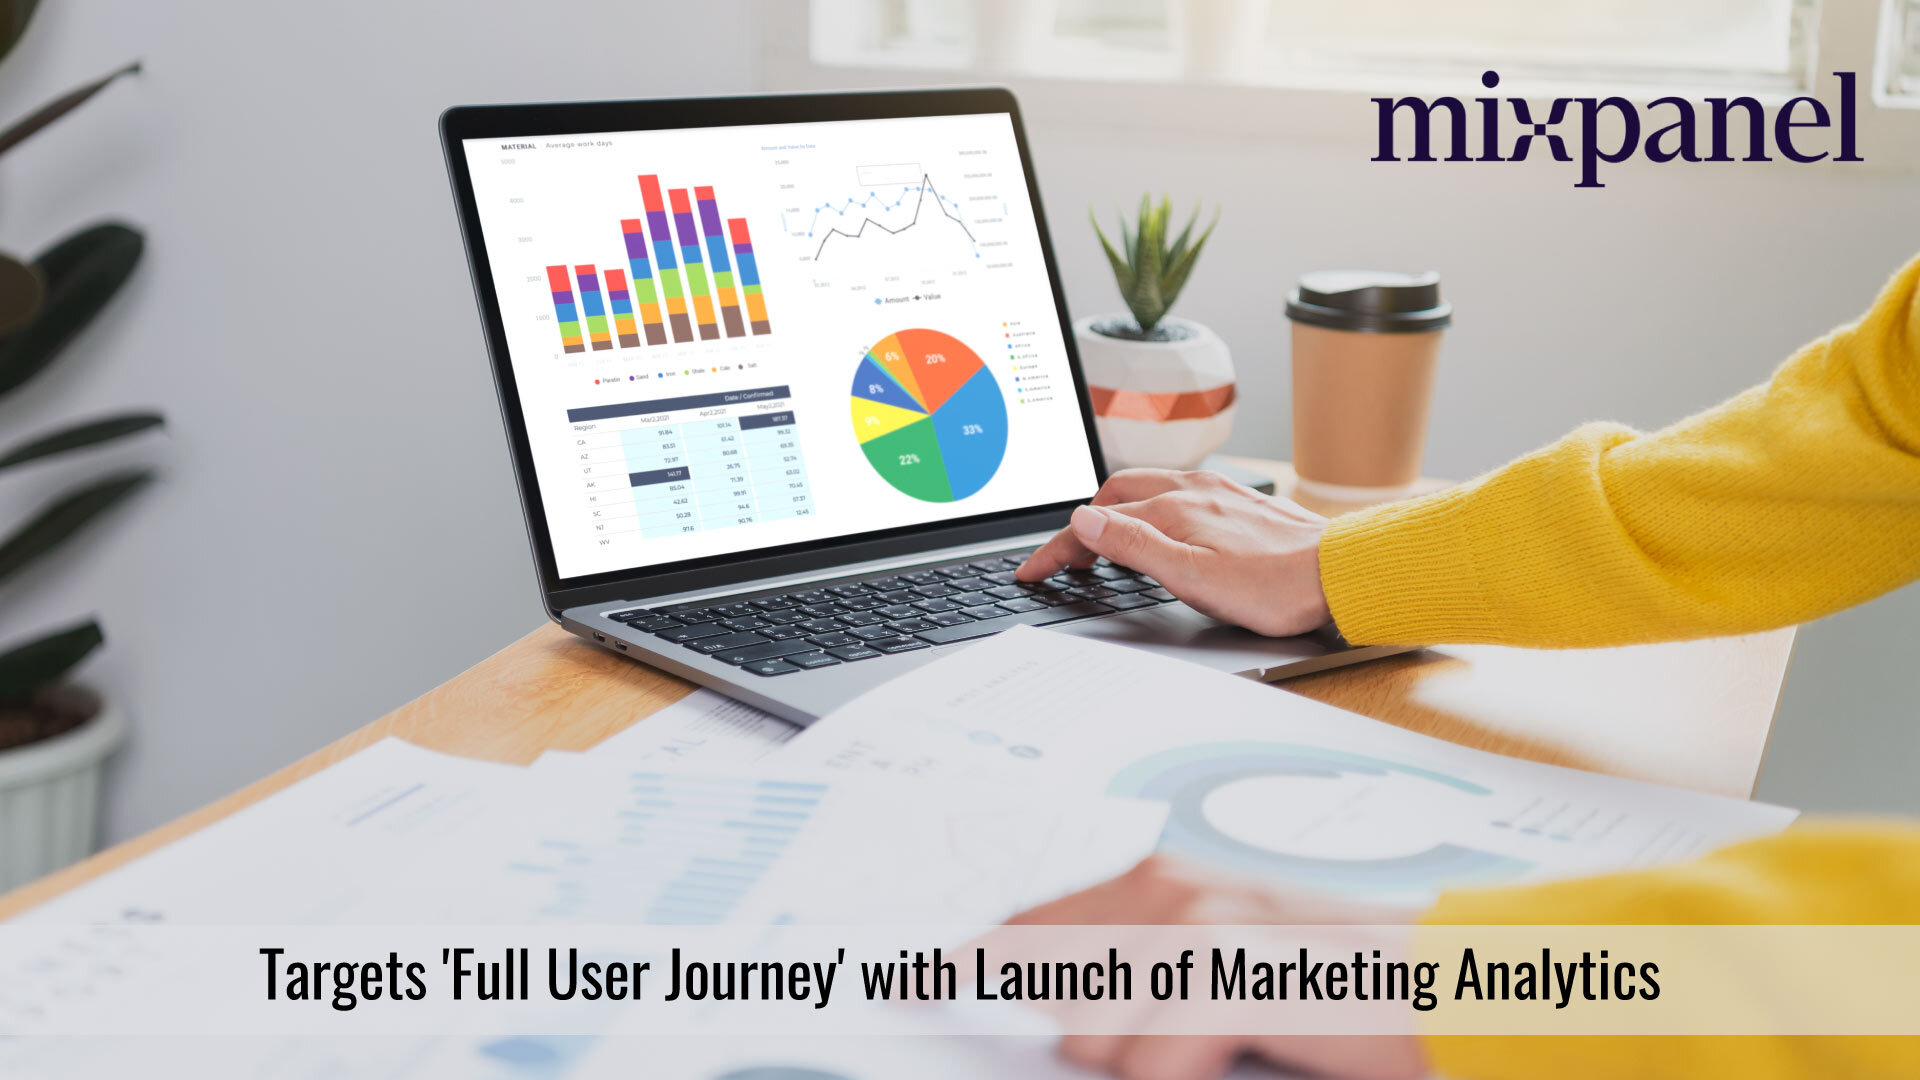 Mixpanel targets 'full user journey' with launch of Marketing Analytics